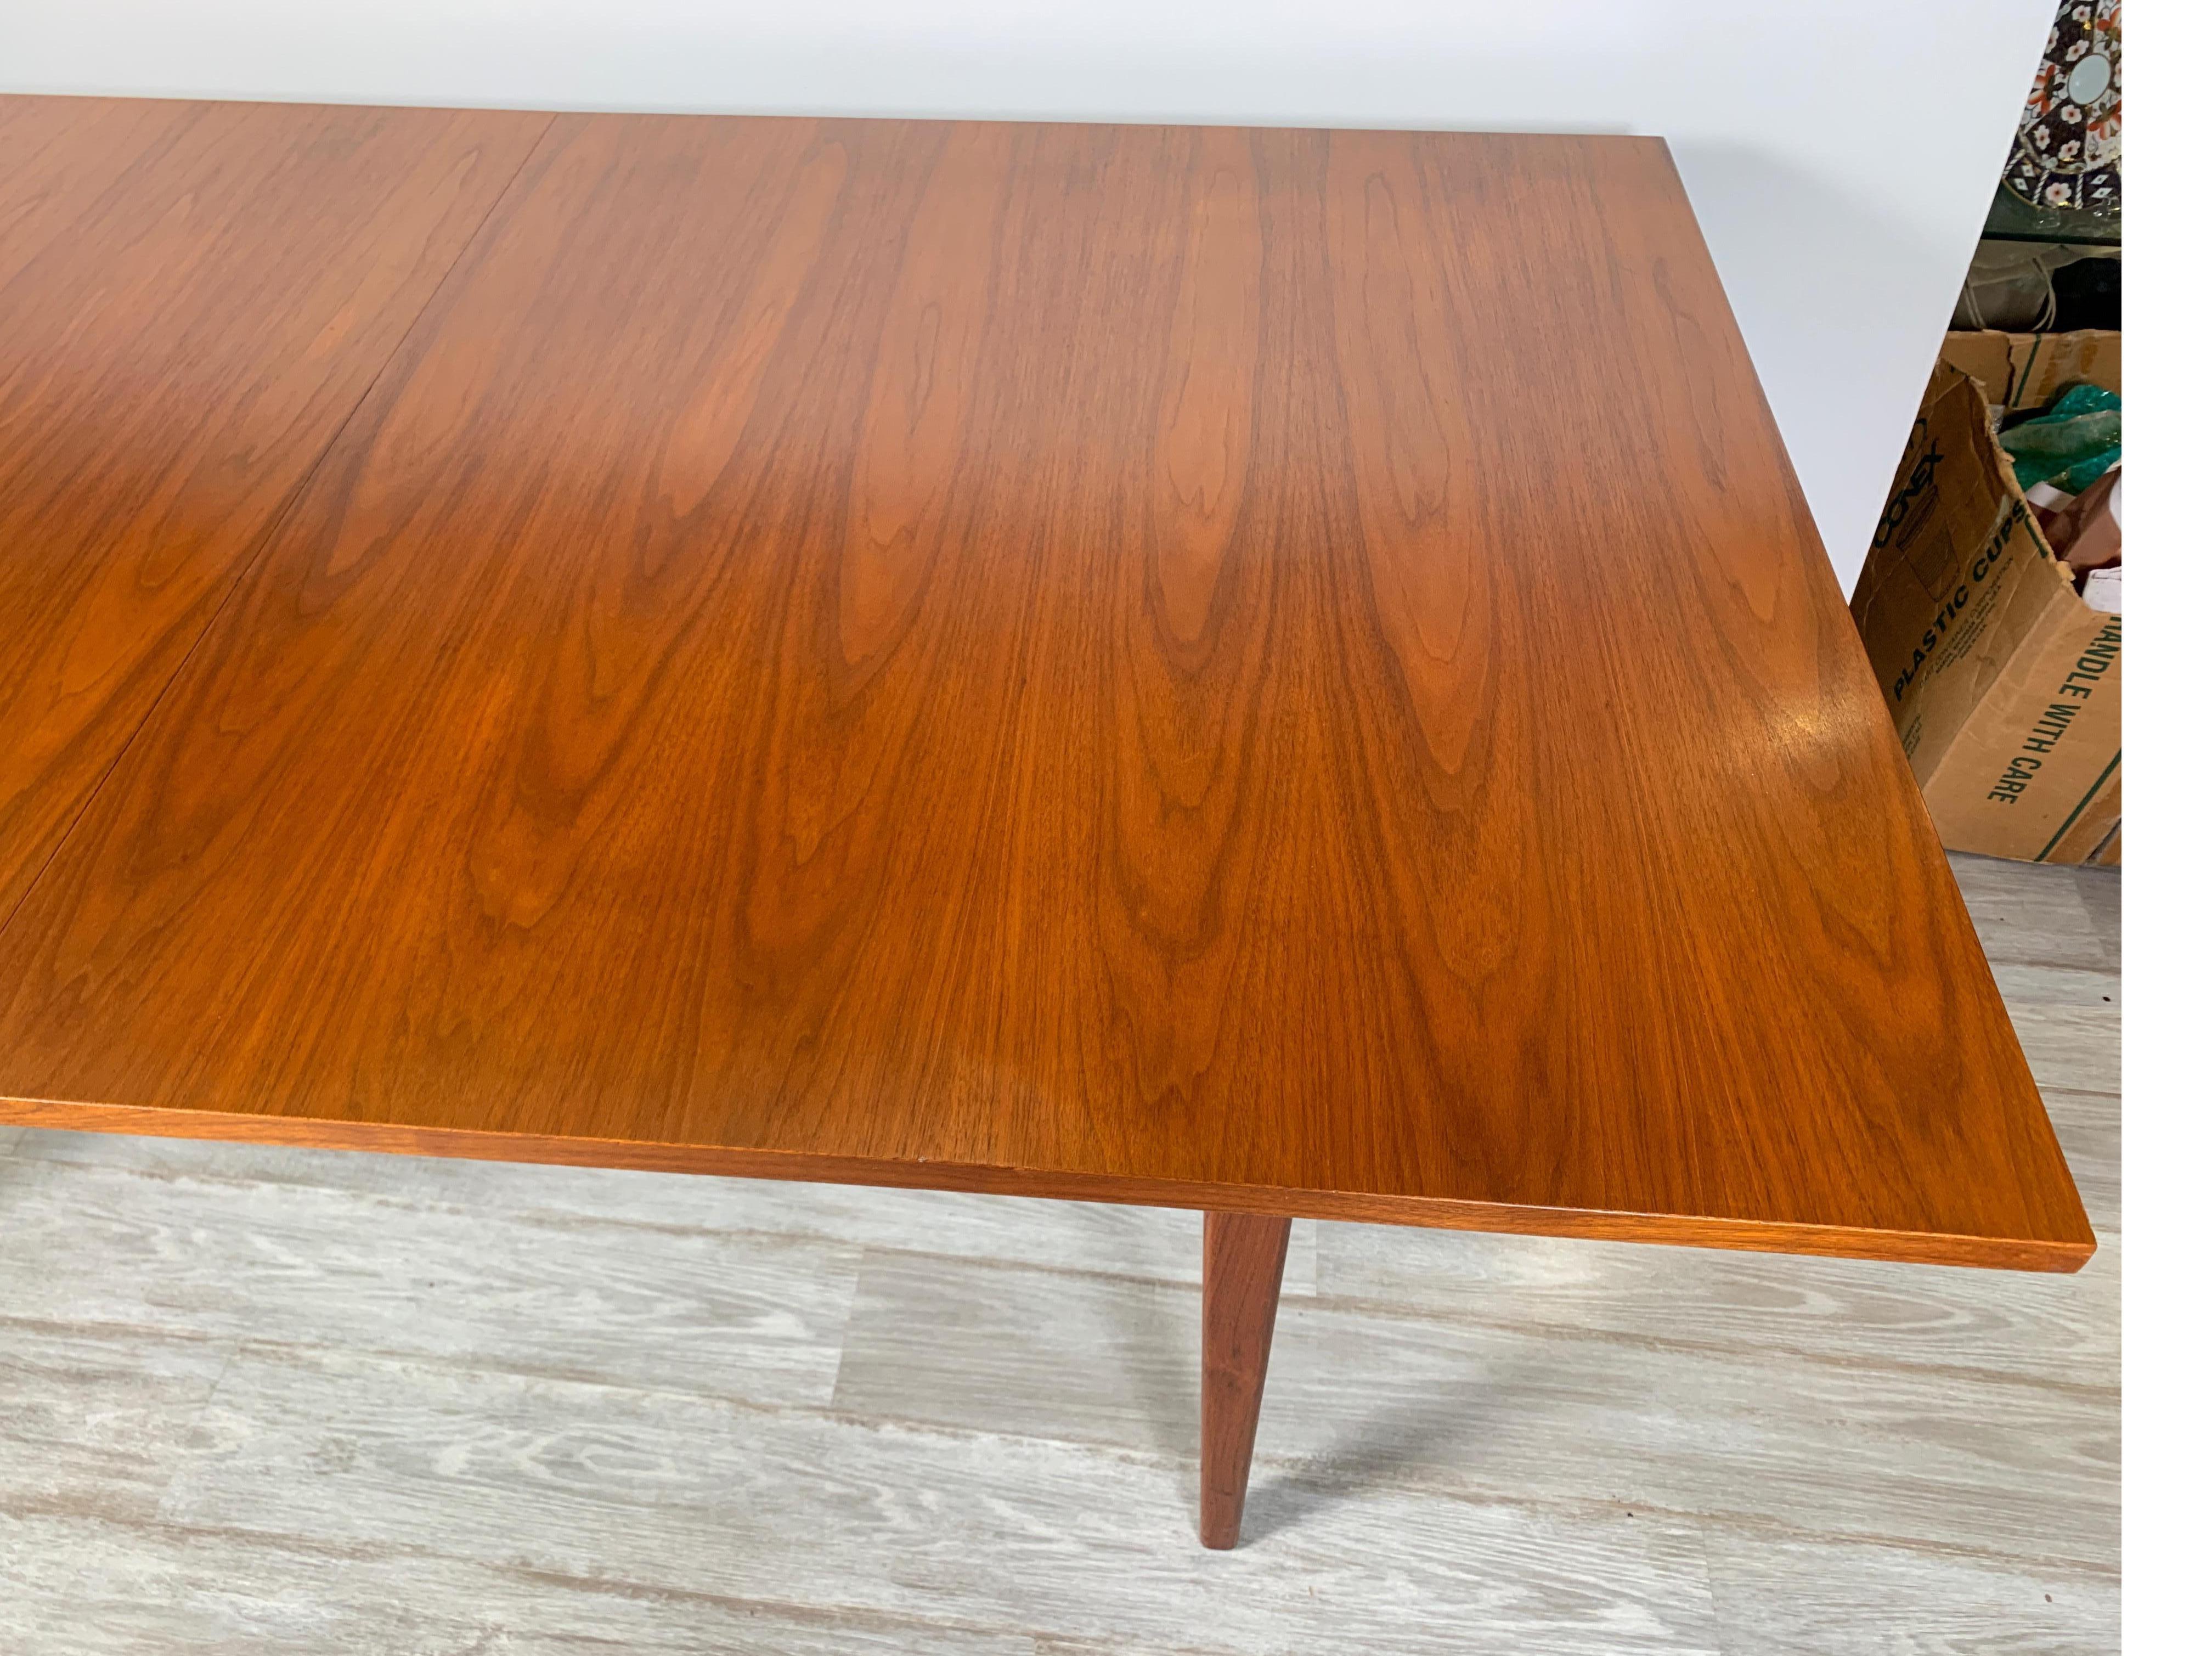 Mid-Century Modern Walnut Dining Table with Two Stored Leaves by George Nelson for Herman Miller